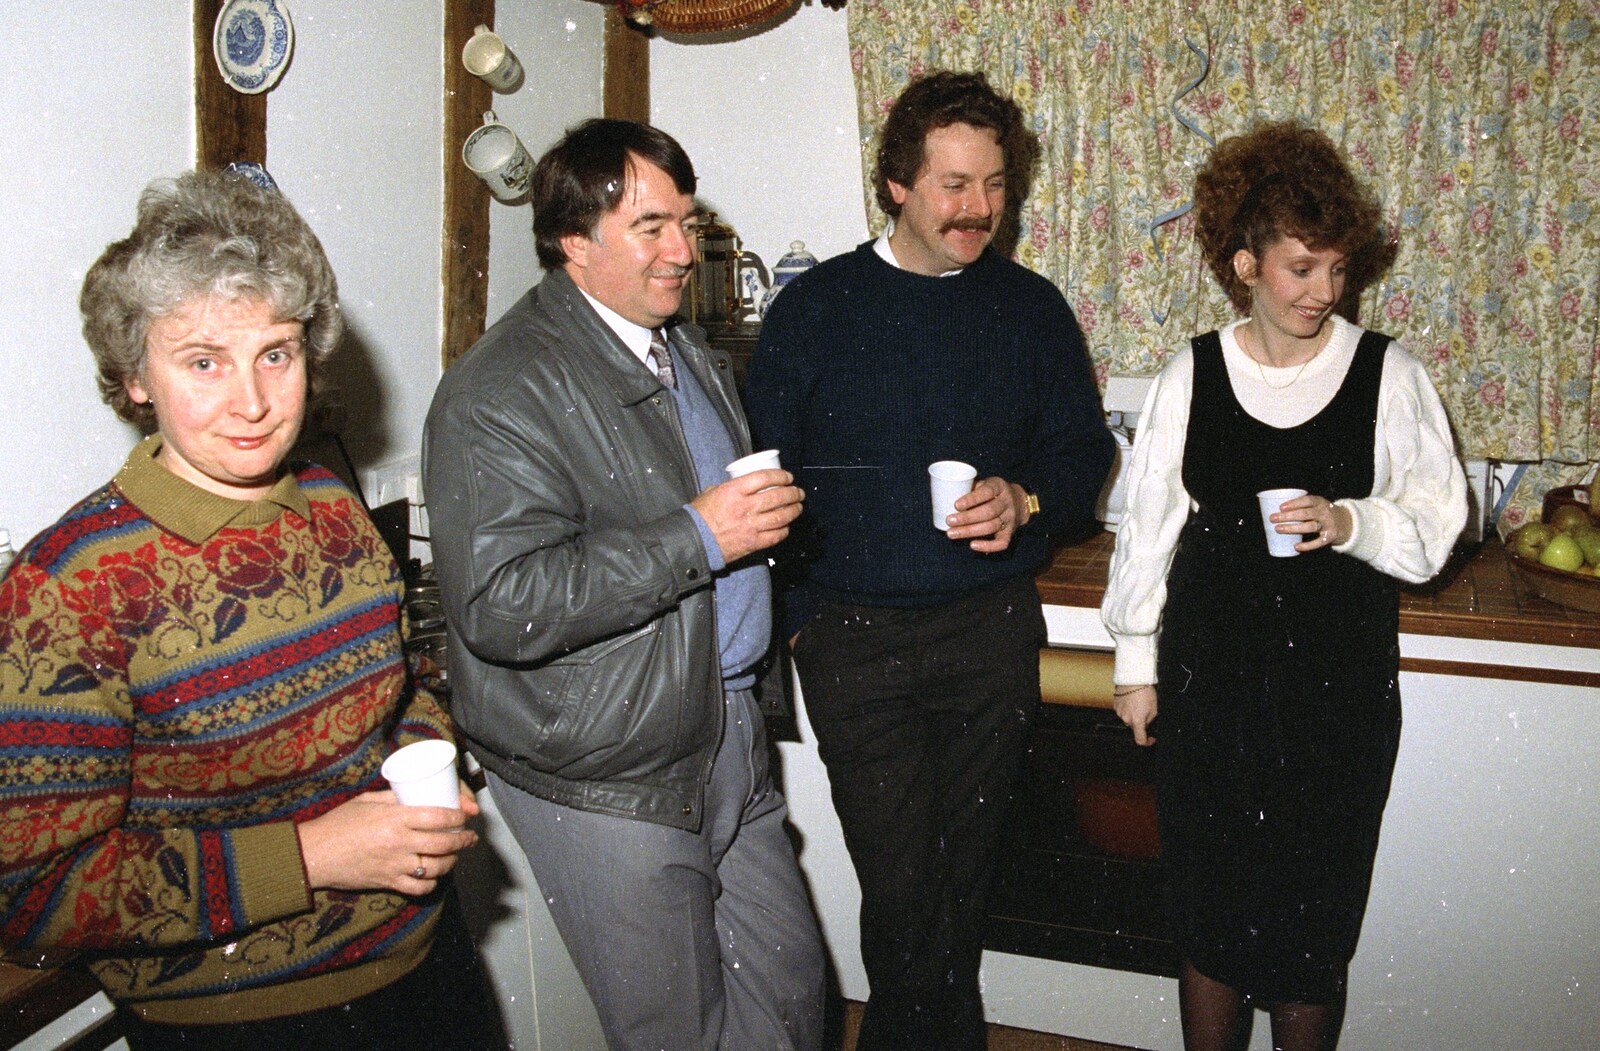 Corky, Keith and Monique discuss stuff from Christmas in Devon and Stuston - 25th December 1991